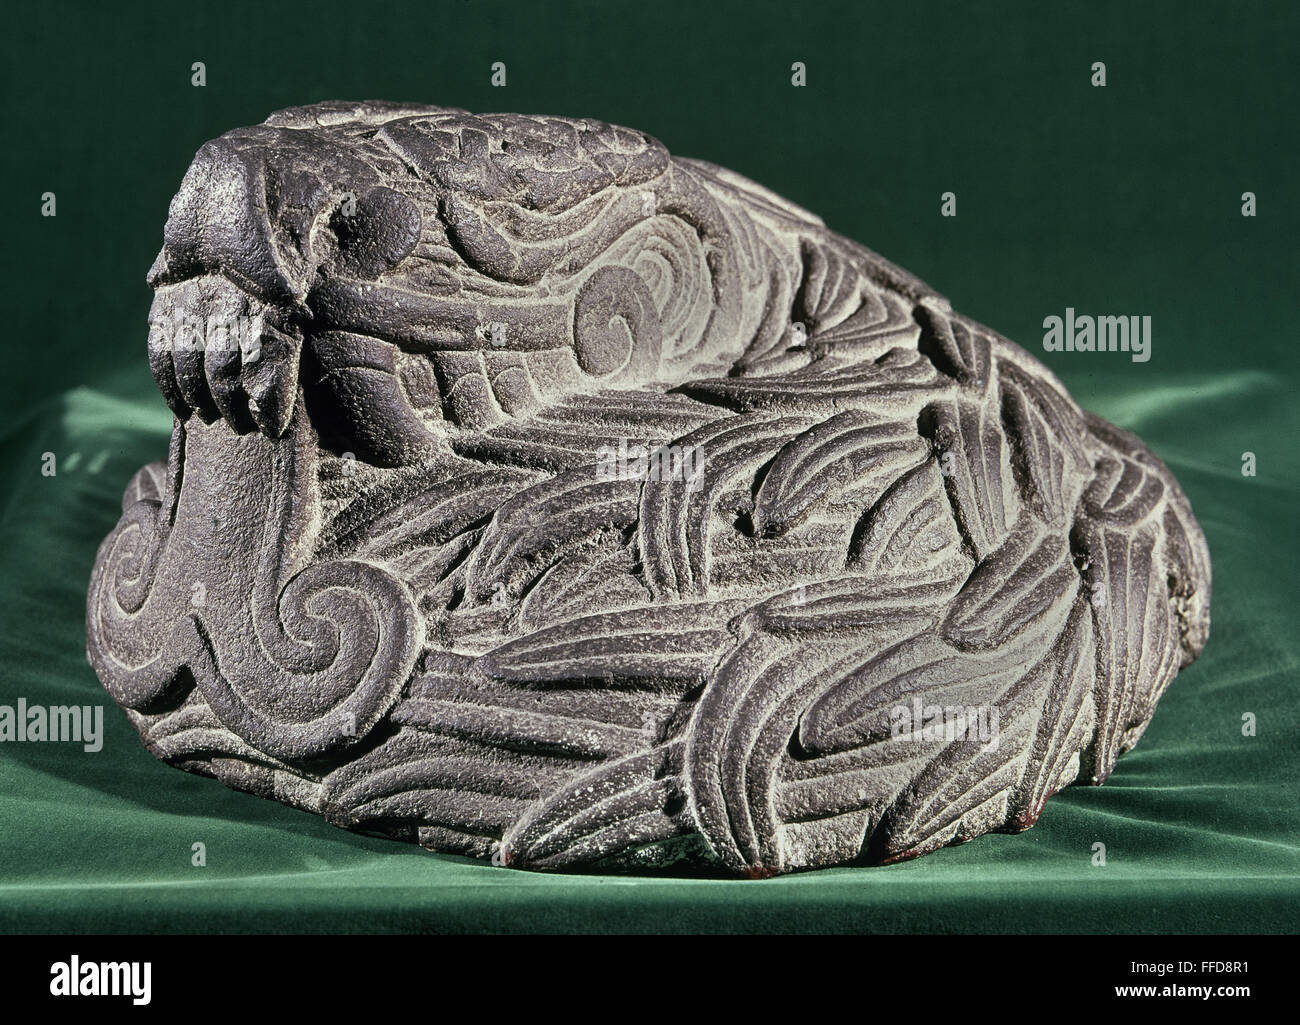 QUETZALCOATL, c1450. /nThe mesoamerican god of Quetzalcoatl, depicted as a coiled, feathered serpent. Stone sculpture, Aztec, from Mexico City, c1450. Stock Photo